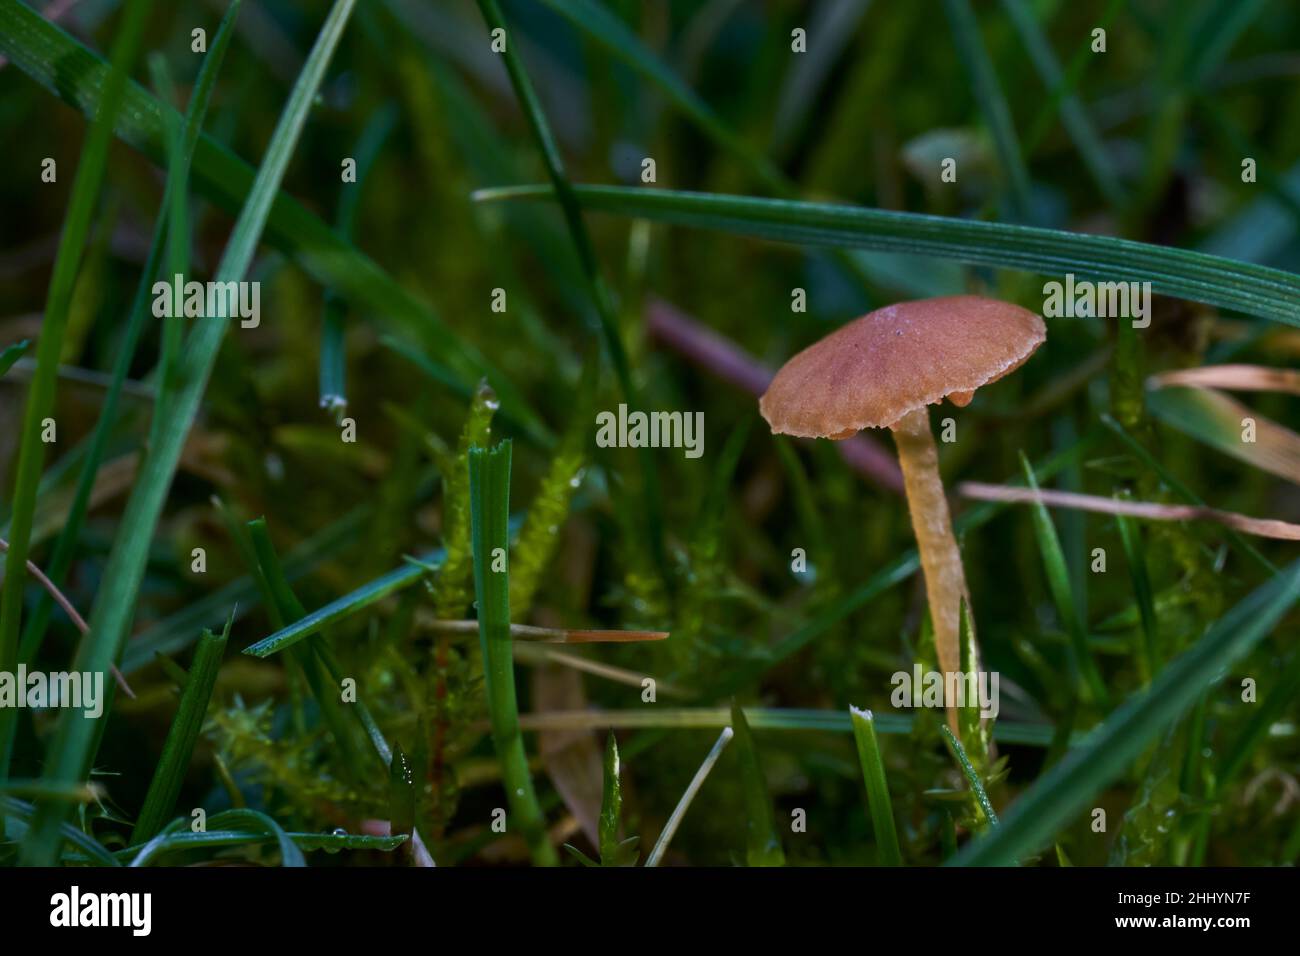 close up of a small brown mushroom growing in the grass in a garden Stock Photo